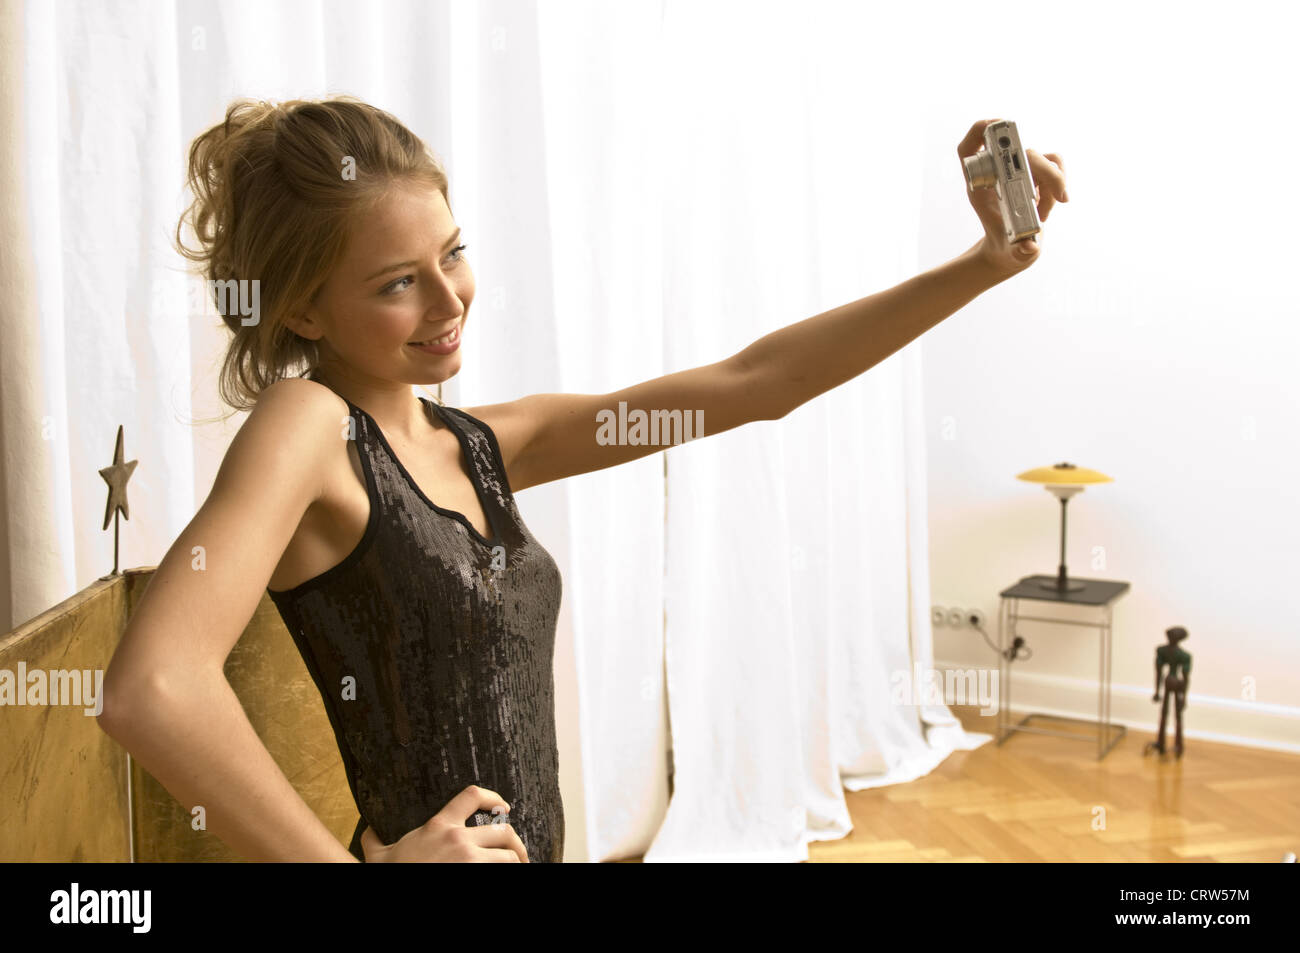 woman photographing herself Stock Photo